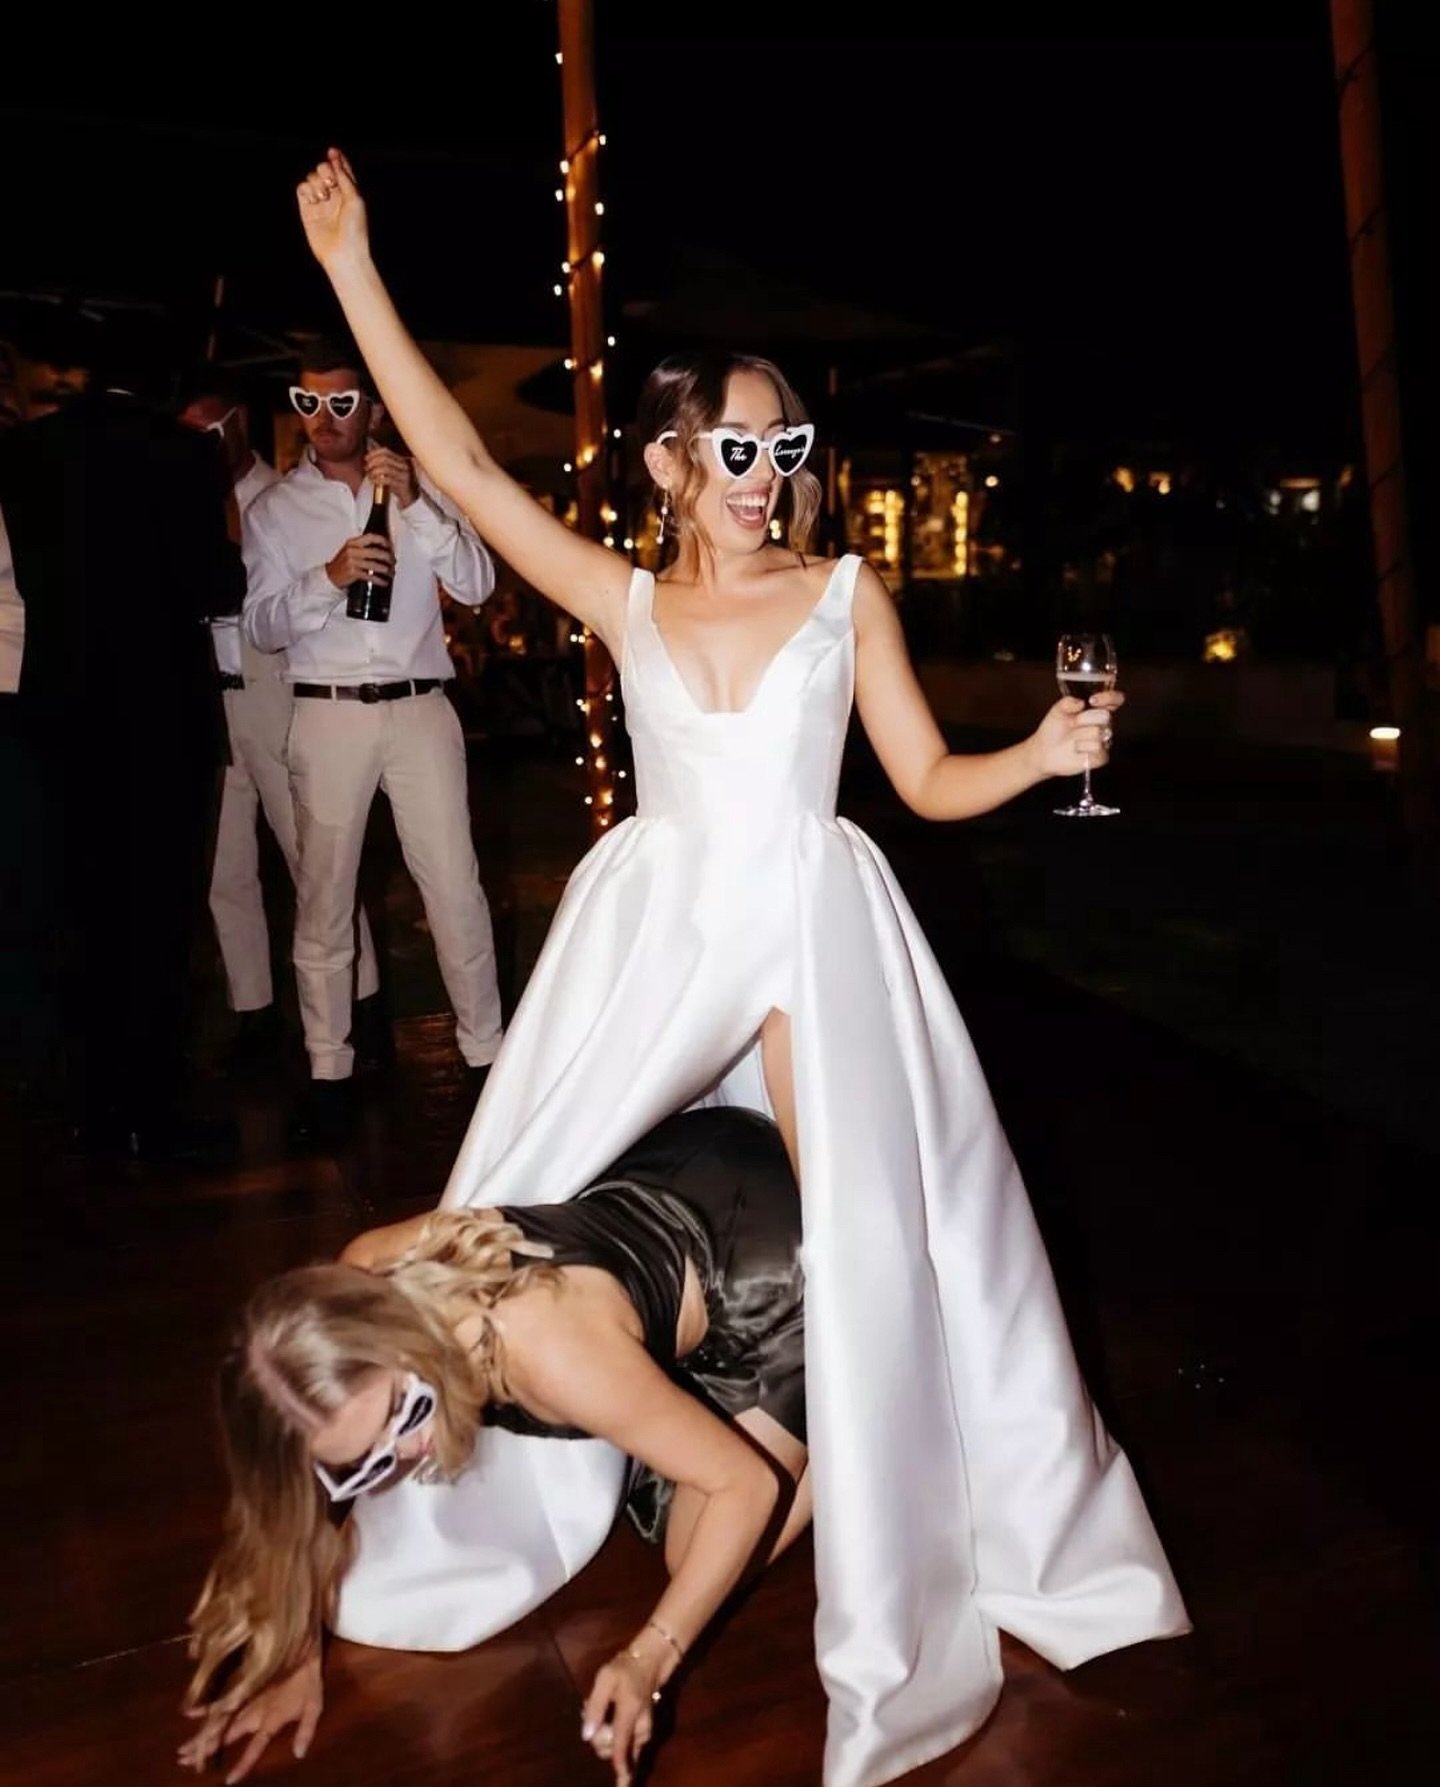 What happens on the dance floor, stays&hellip;. Nahhhh we can&rsquo;t keep dance floor shenanigans to ourselves! Such an epic moment caught on film by @joshball_weddings. 

#margaretriver #margaretriverweddings #wawedding #southwestwa #downsouthwa #p